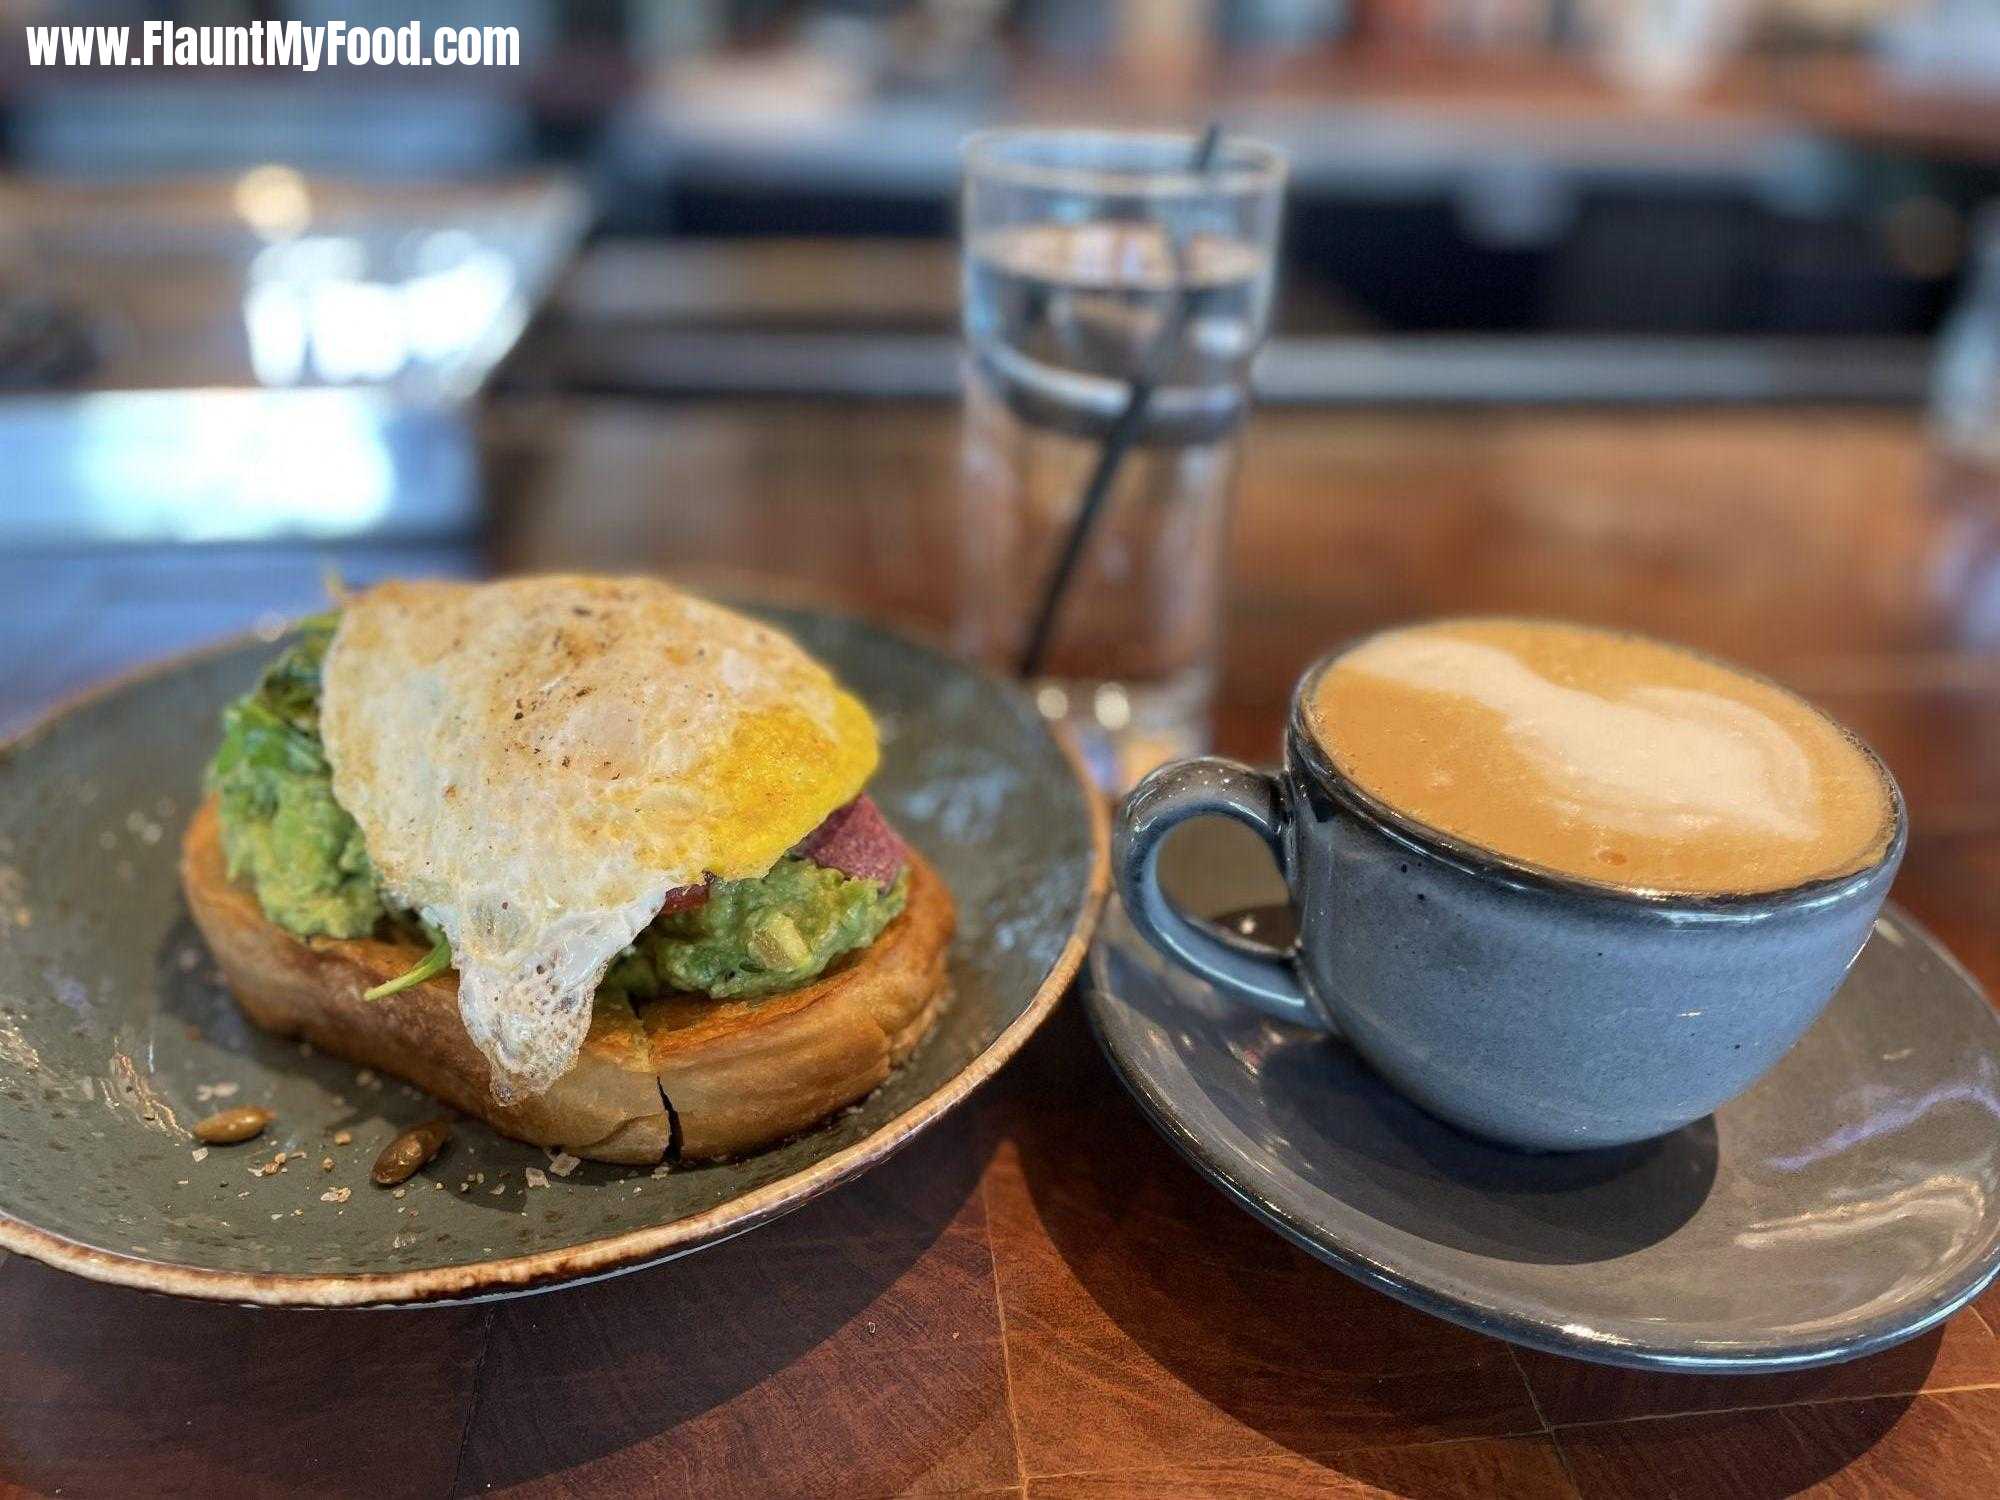 Avocado Toast with an Egg over Hard and a Decaf Latte at Press Cafe in Clearfork Fort Worth Texas